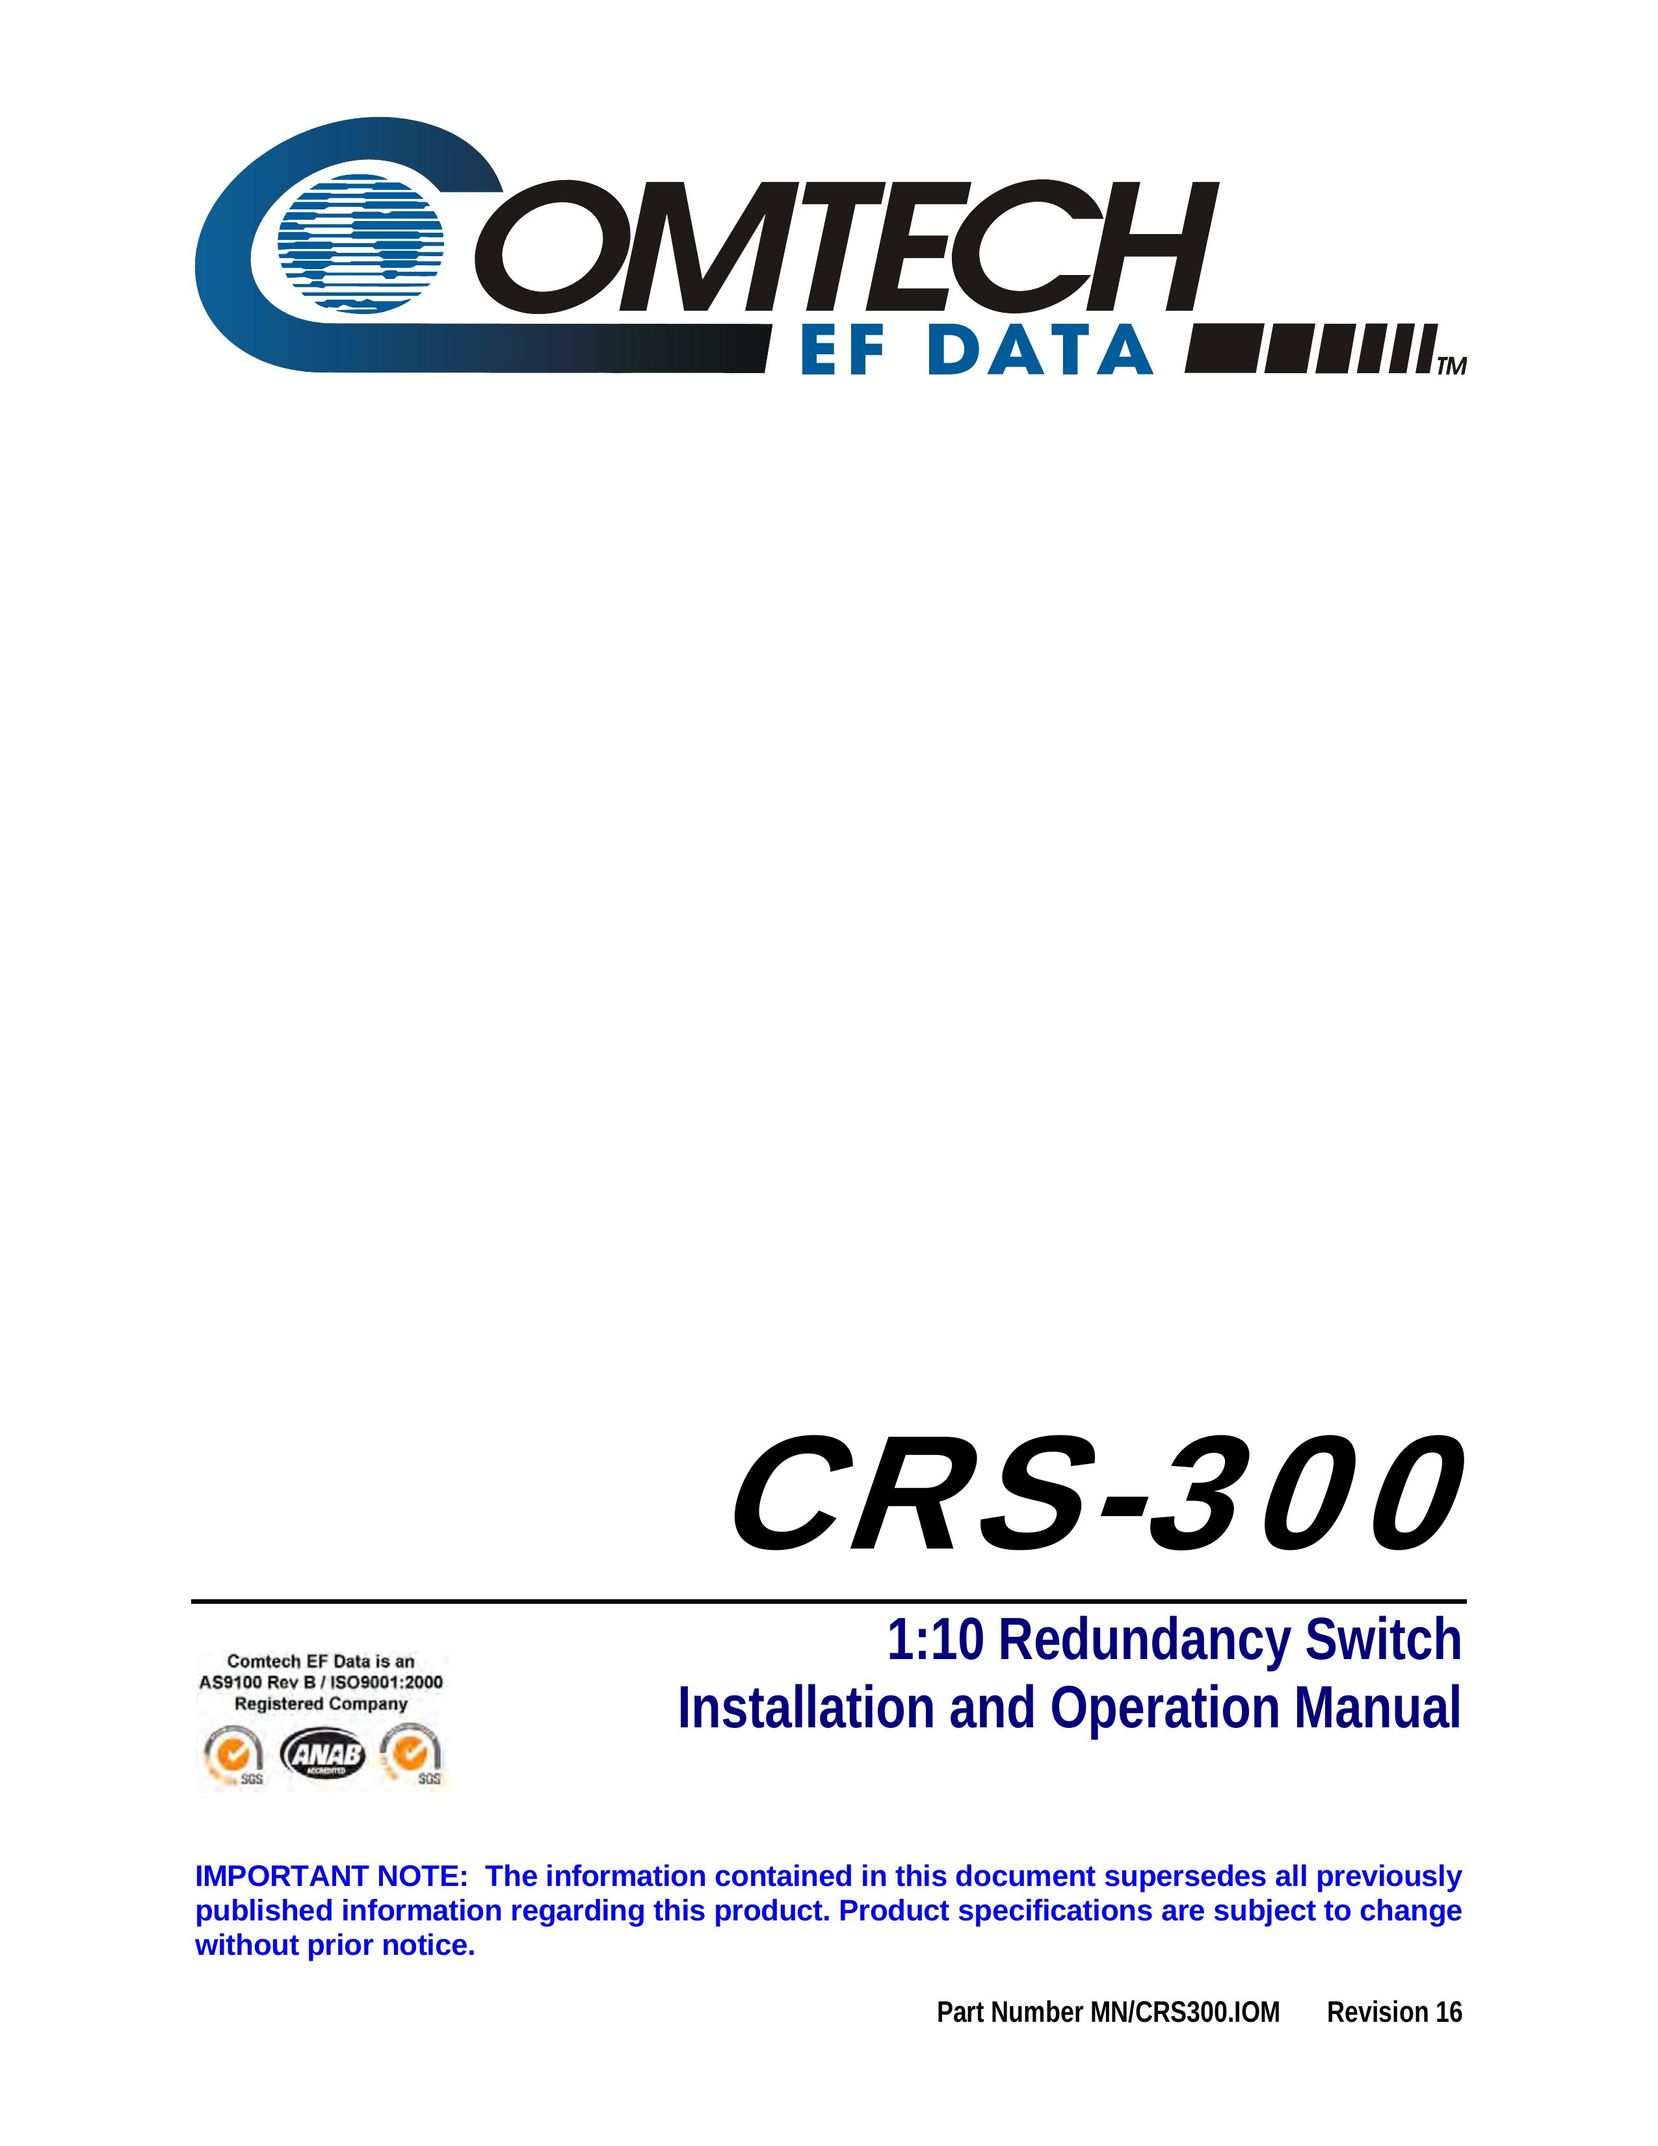 Mocomtech CRS-300 Switch User Manual